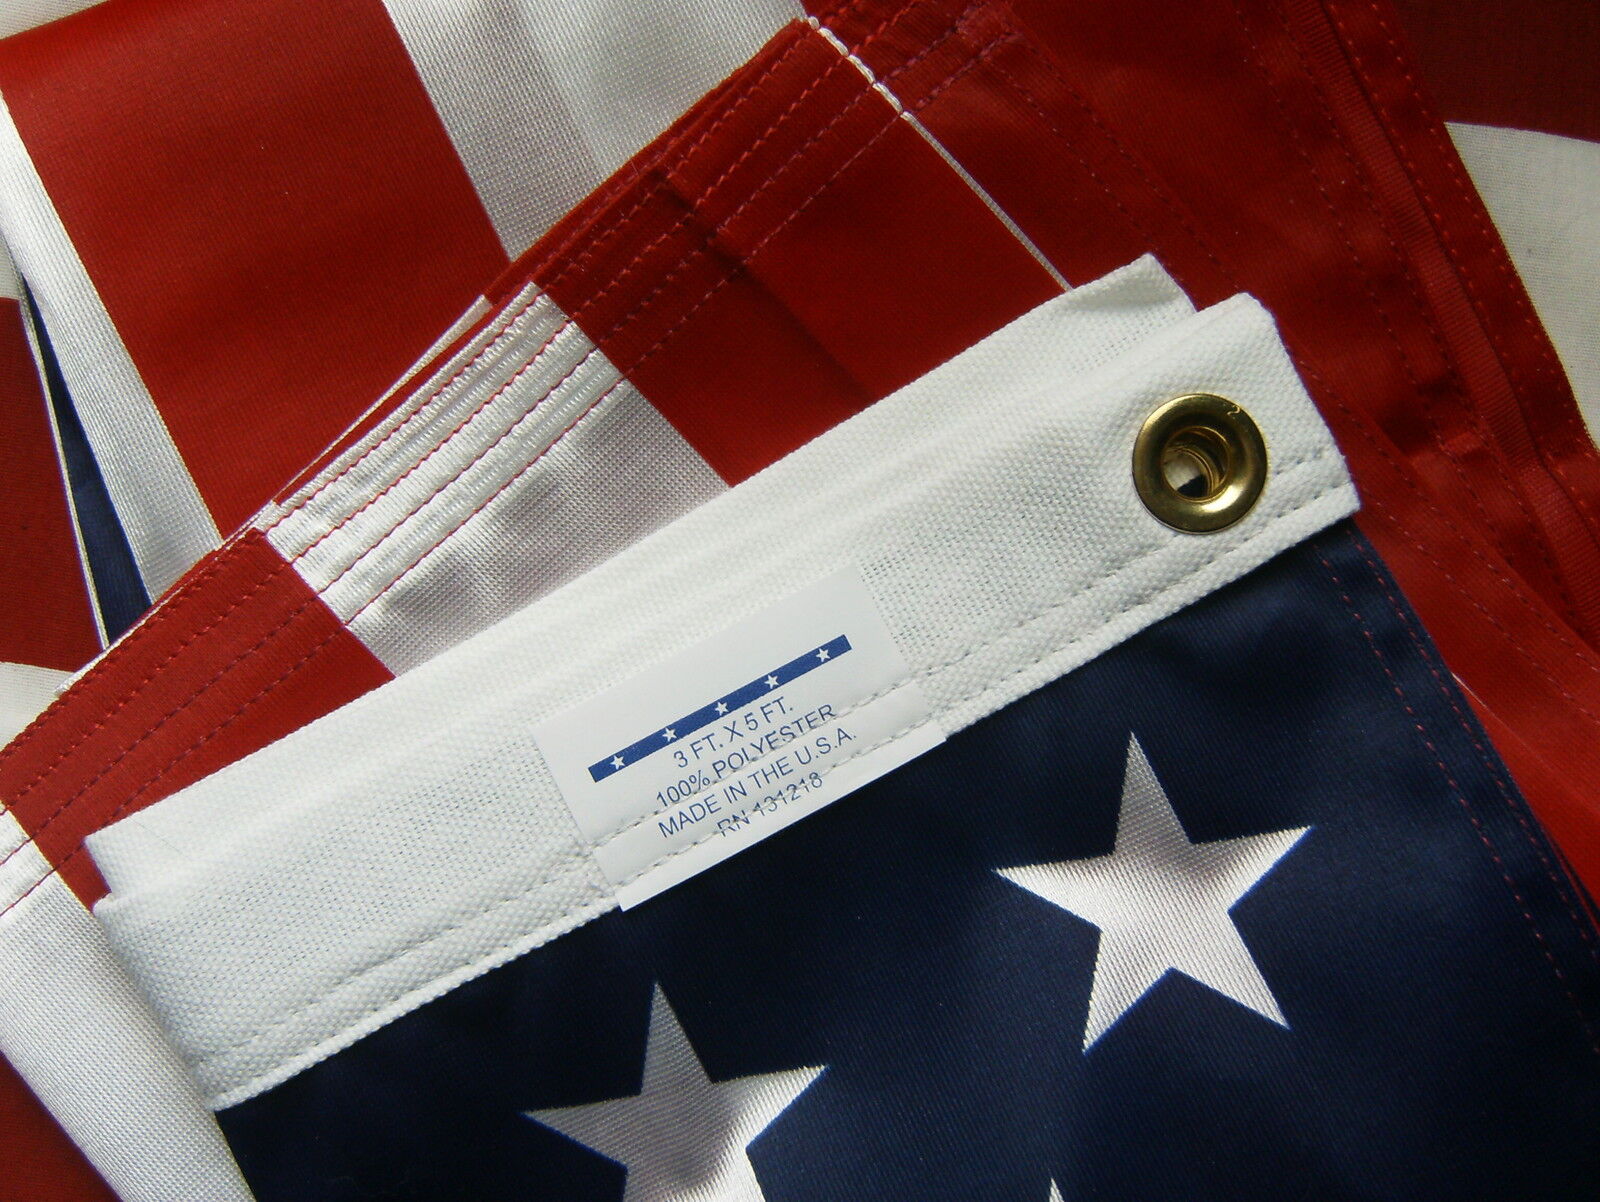  Valley Forge US American Flag 3'x5' ULTRA KNIT Nylon/Poly 100% Made in the USA Без бренда